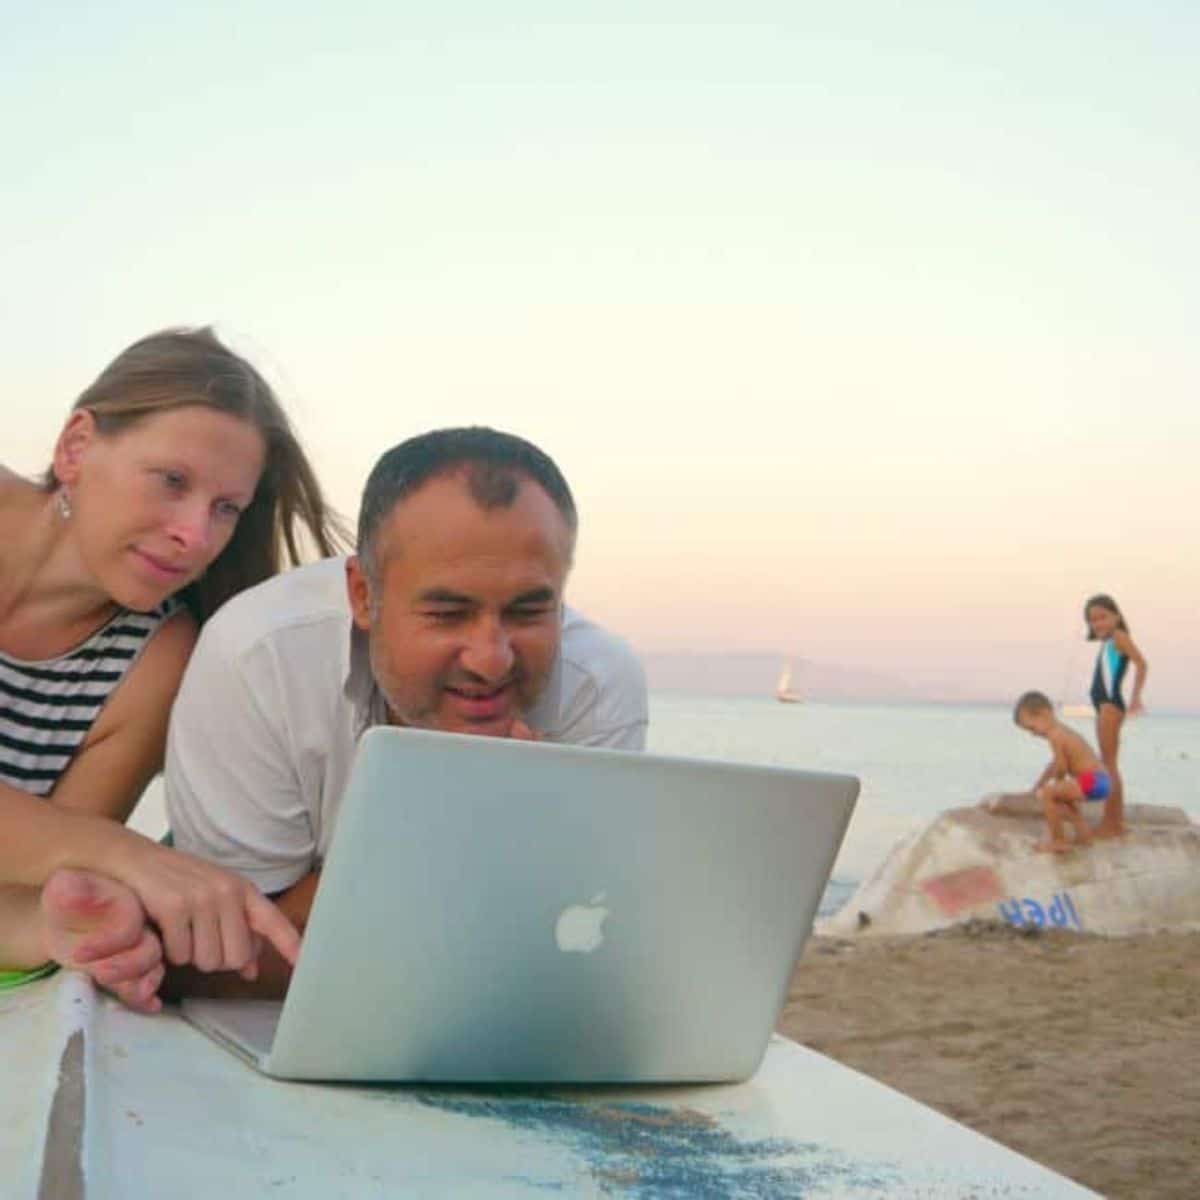 Parents working on laptop from a beach.